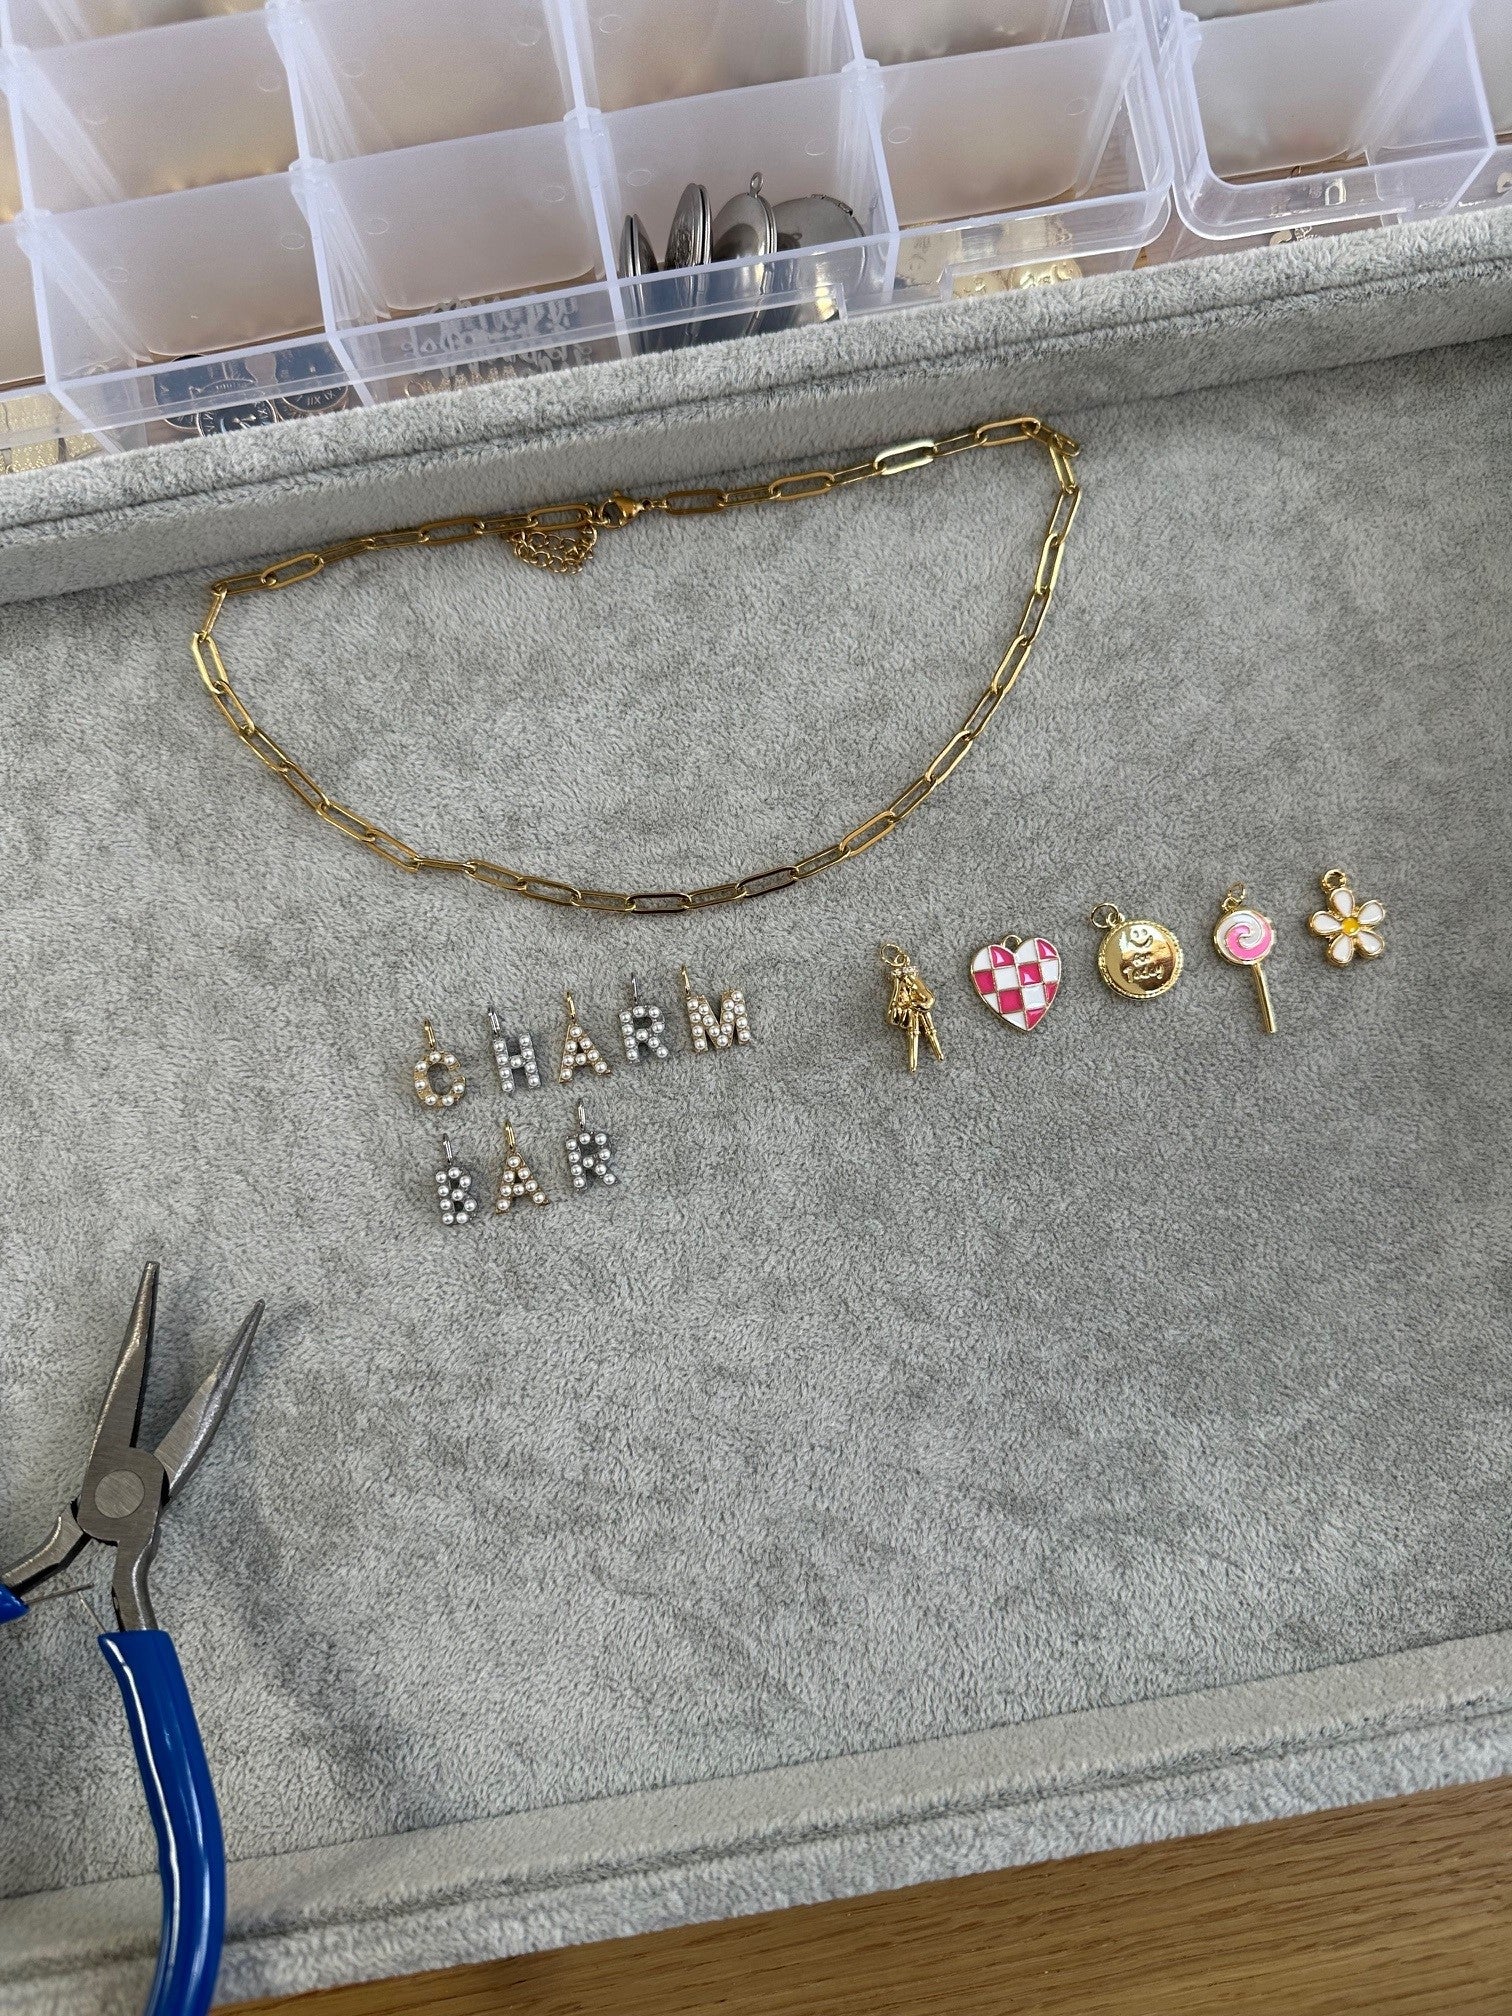 Semi Charm’d - Design Your Own Charm Bar Jewelry